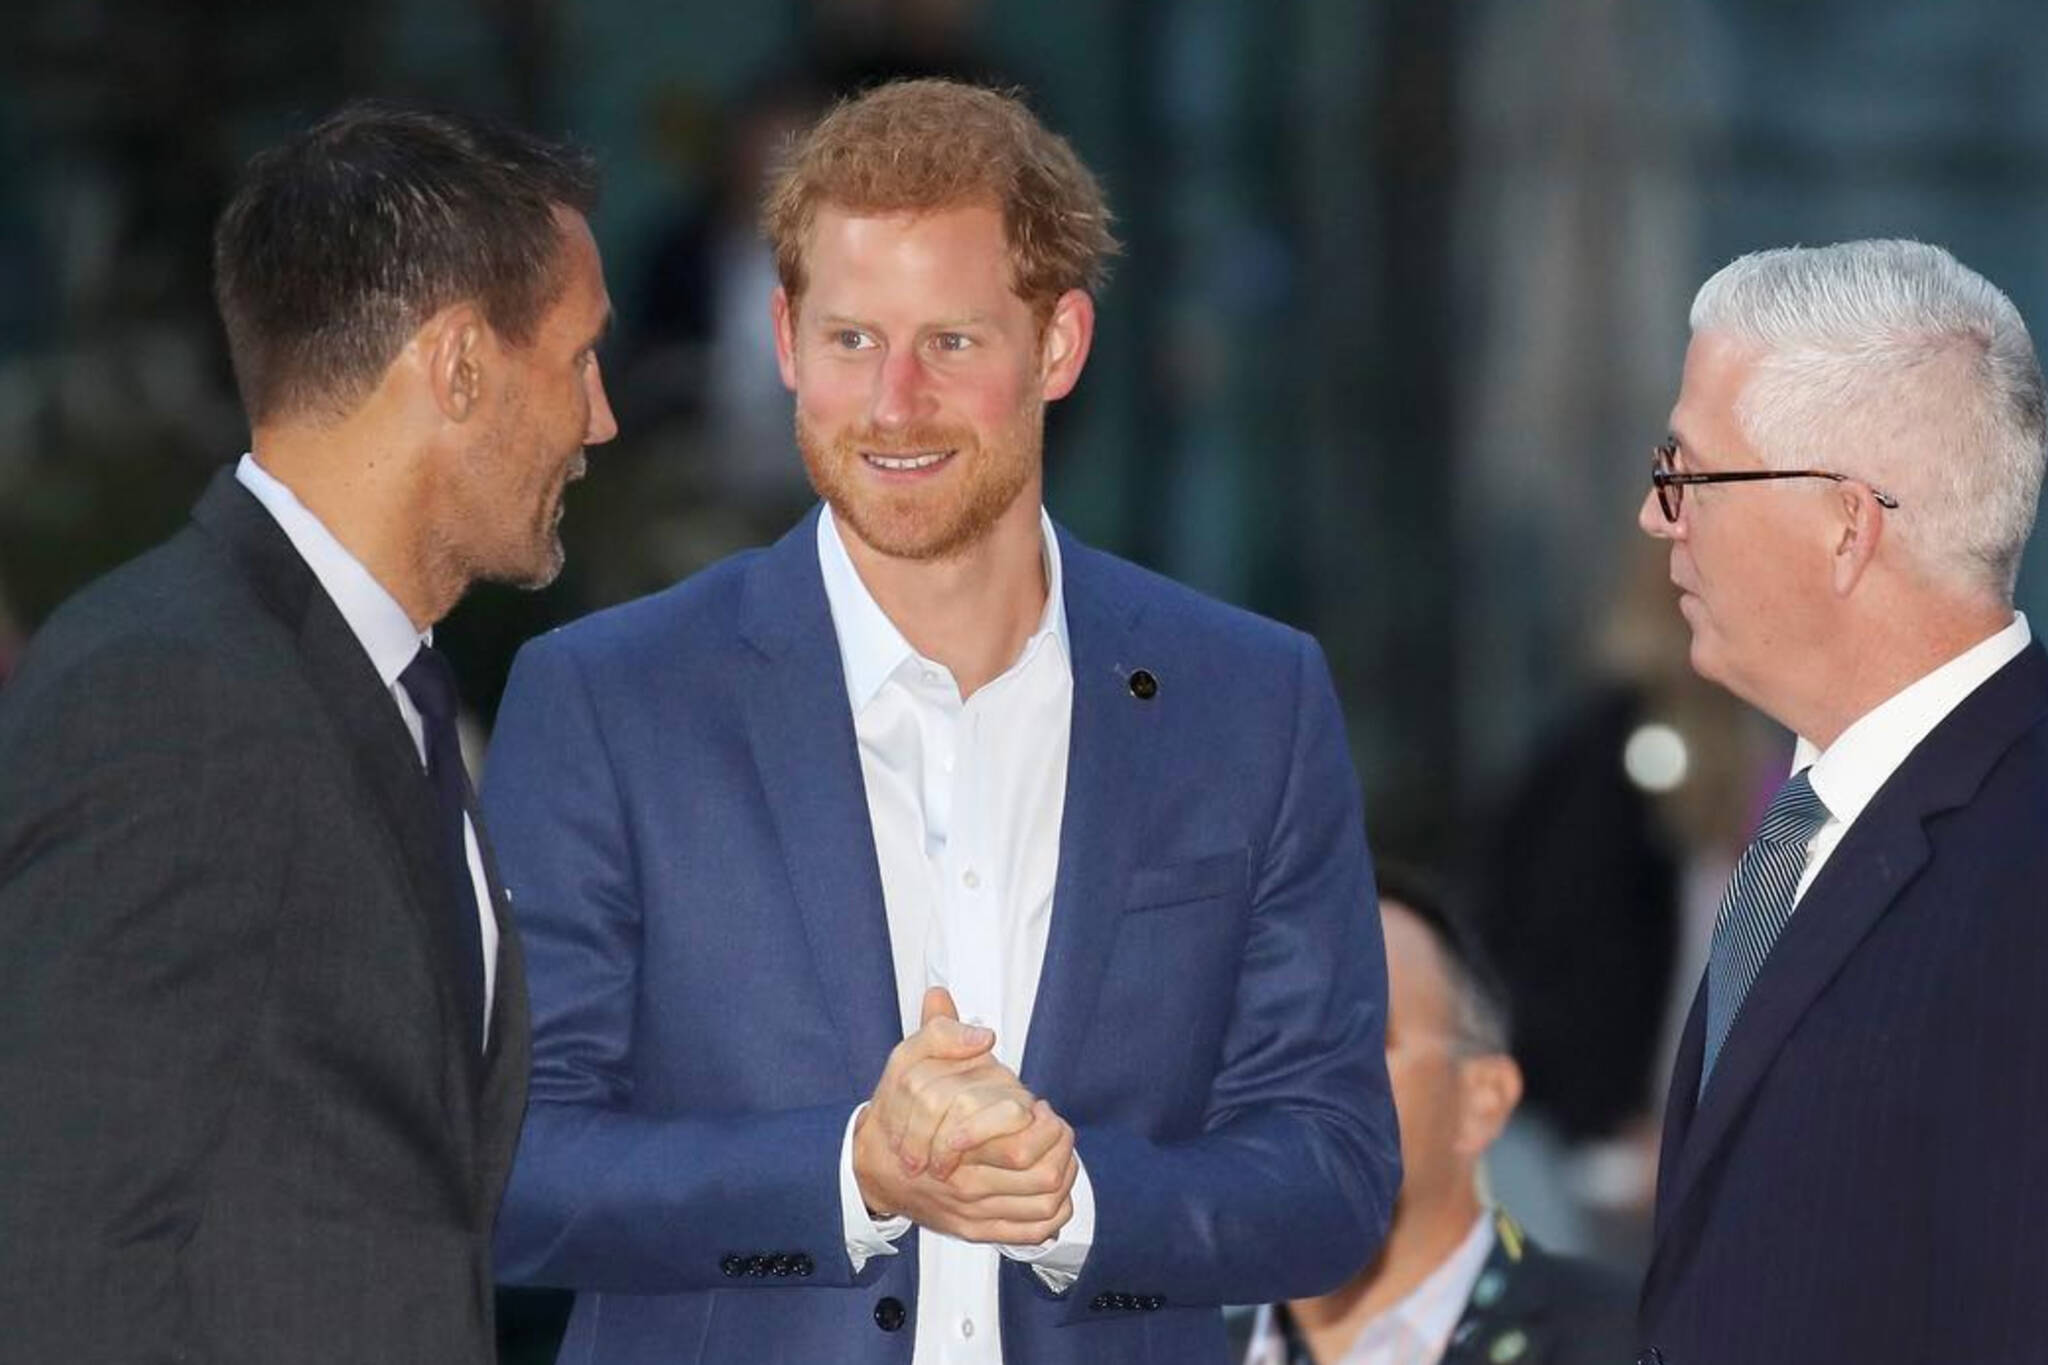 Prince Harry has arrived in Toronto